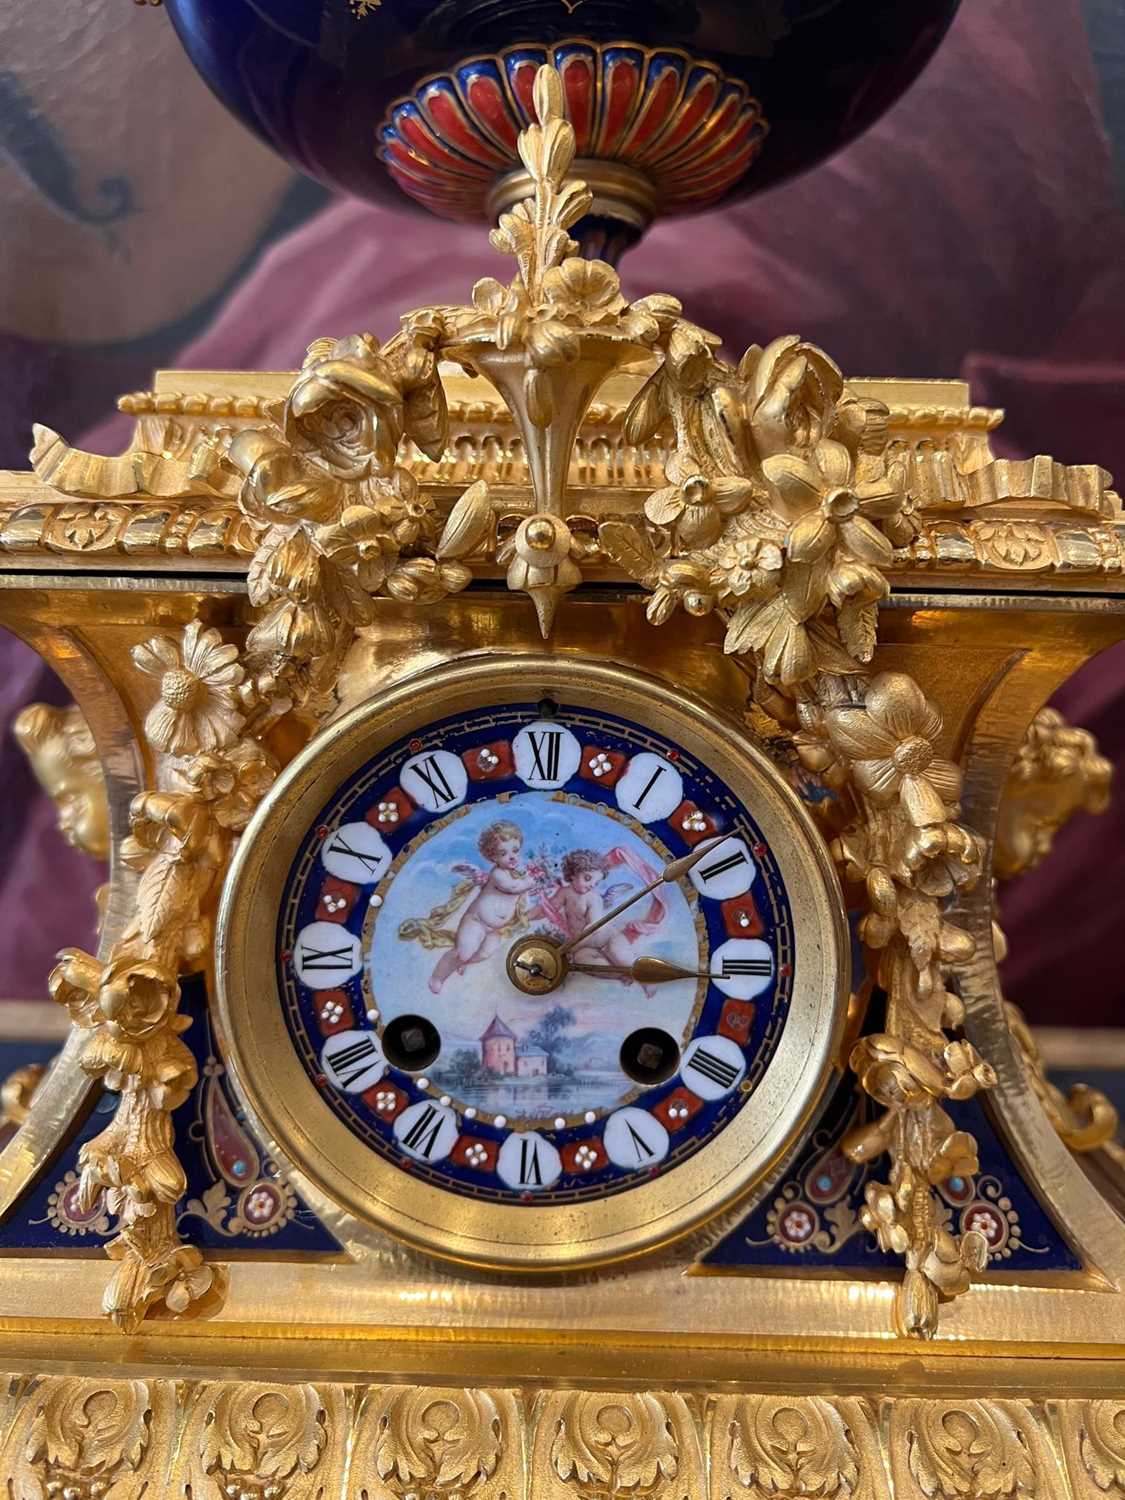 AN EXCEPTIONAL QUALITY LATE 19TH CENTURY FRENCH ORMOLU AND SEVRES STYLE PORCELAIN CLOCK SET - Image 3 of 16